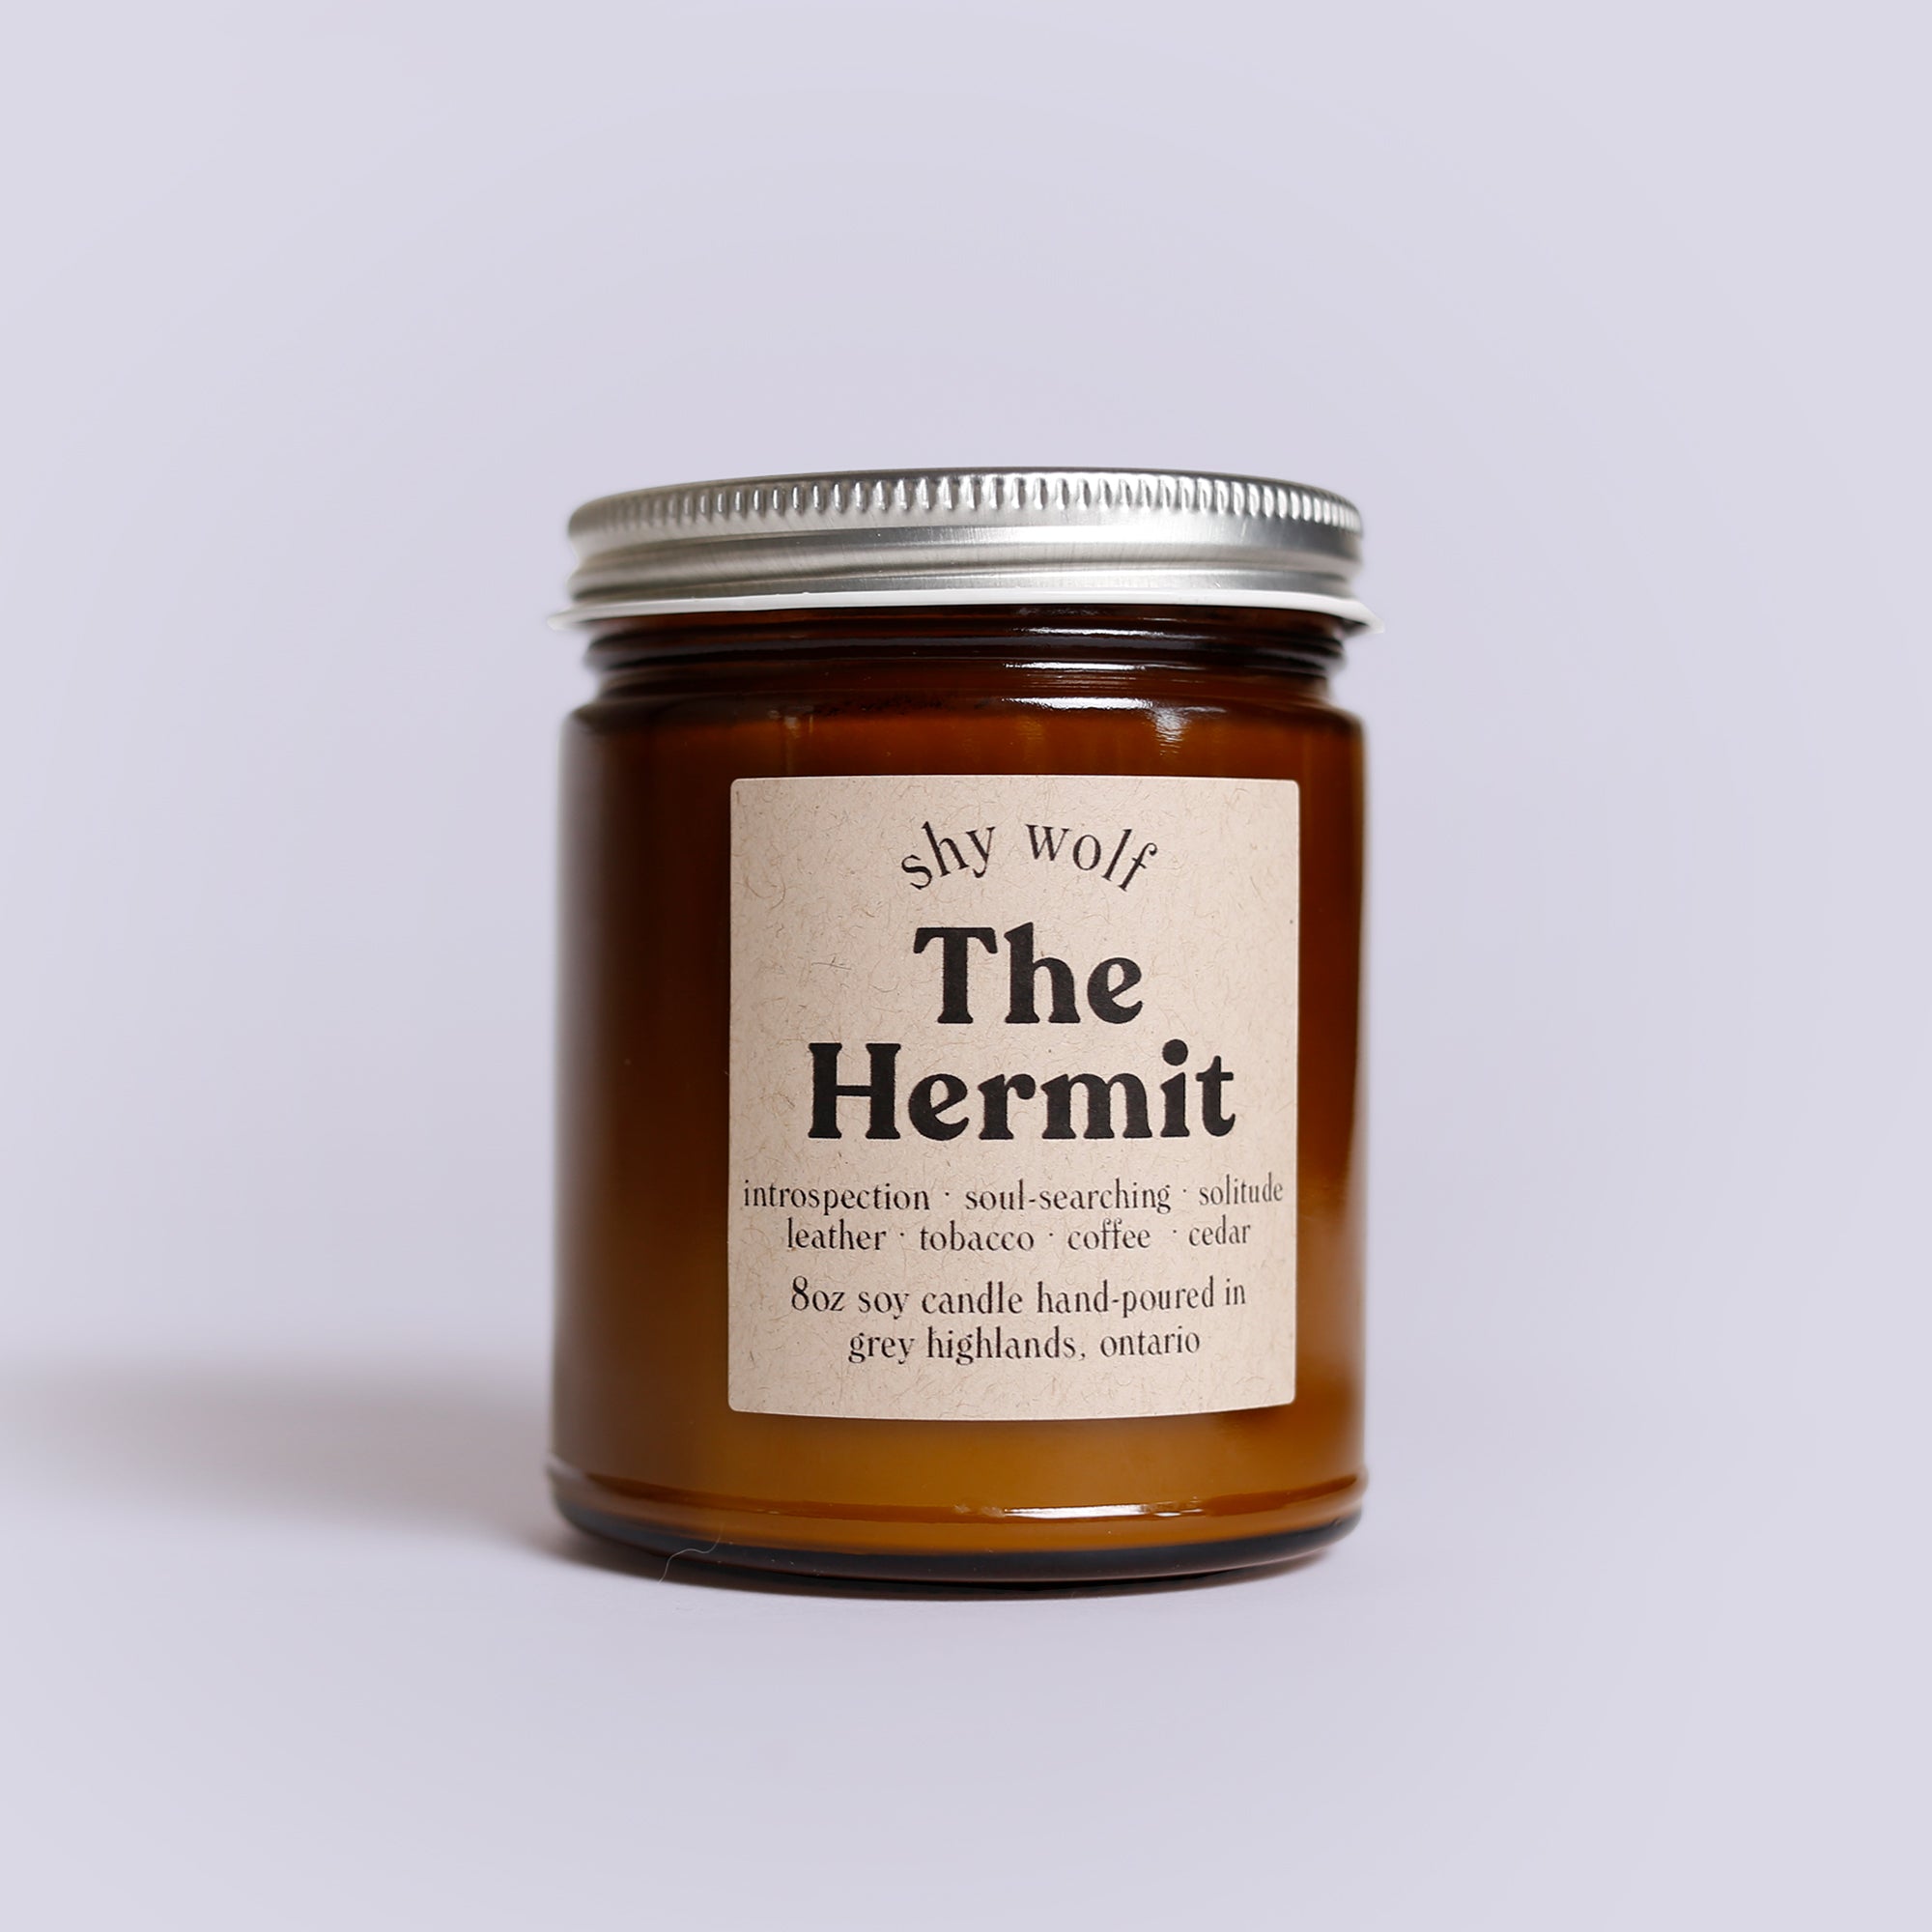 Shy Wolf Candles - The Hermit